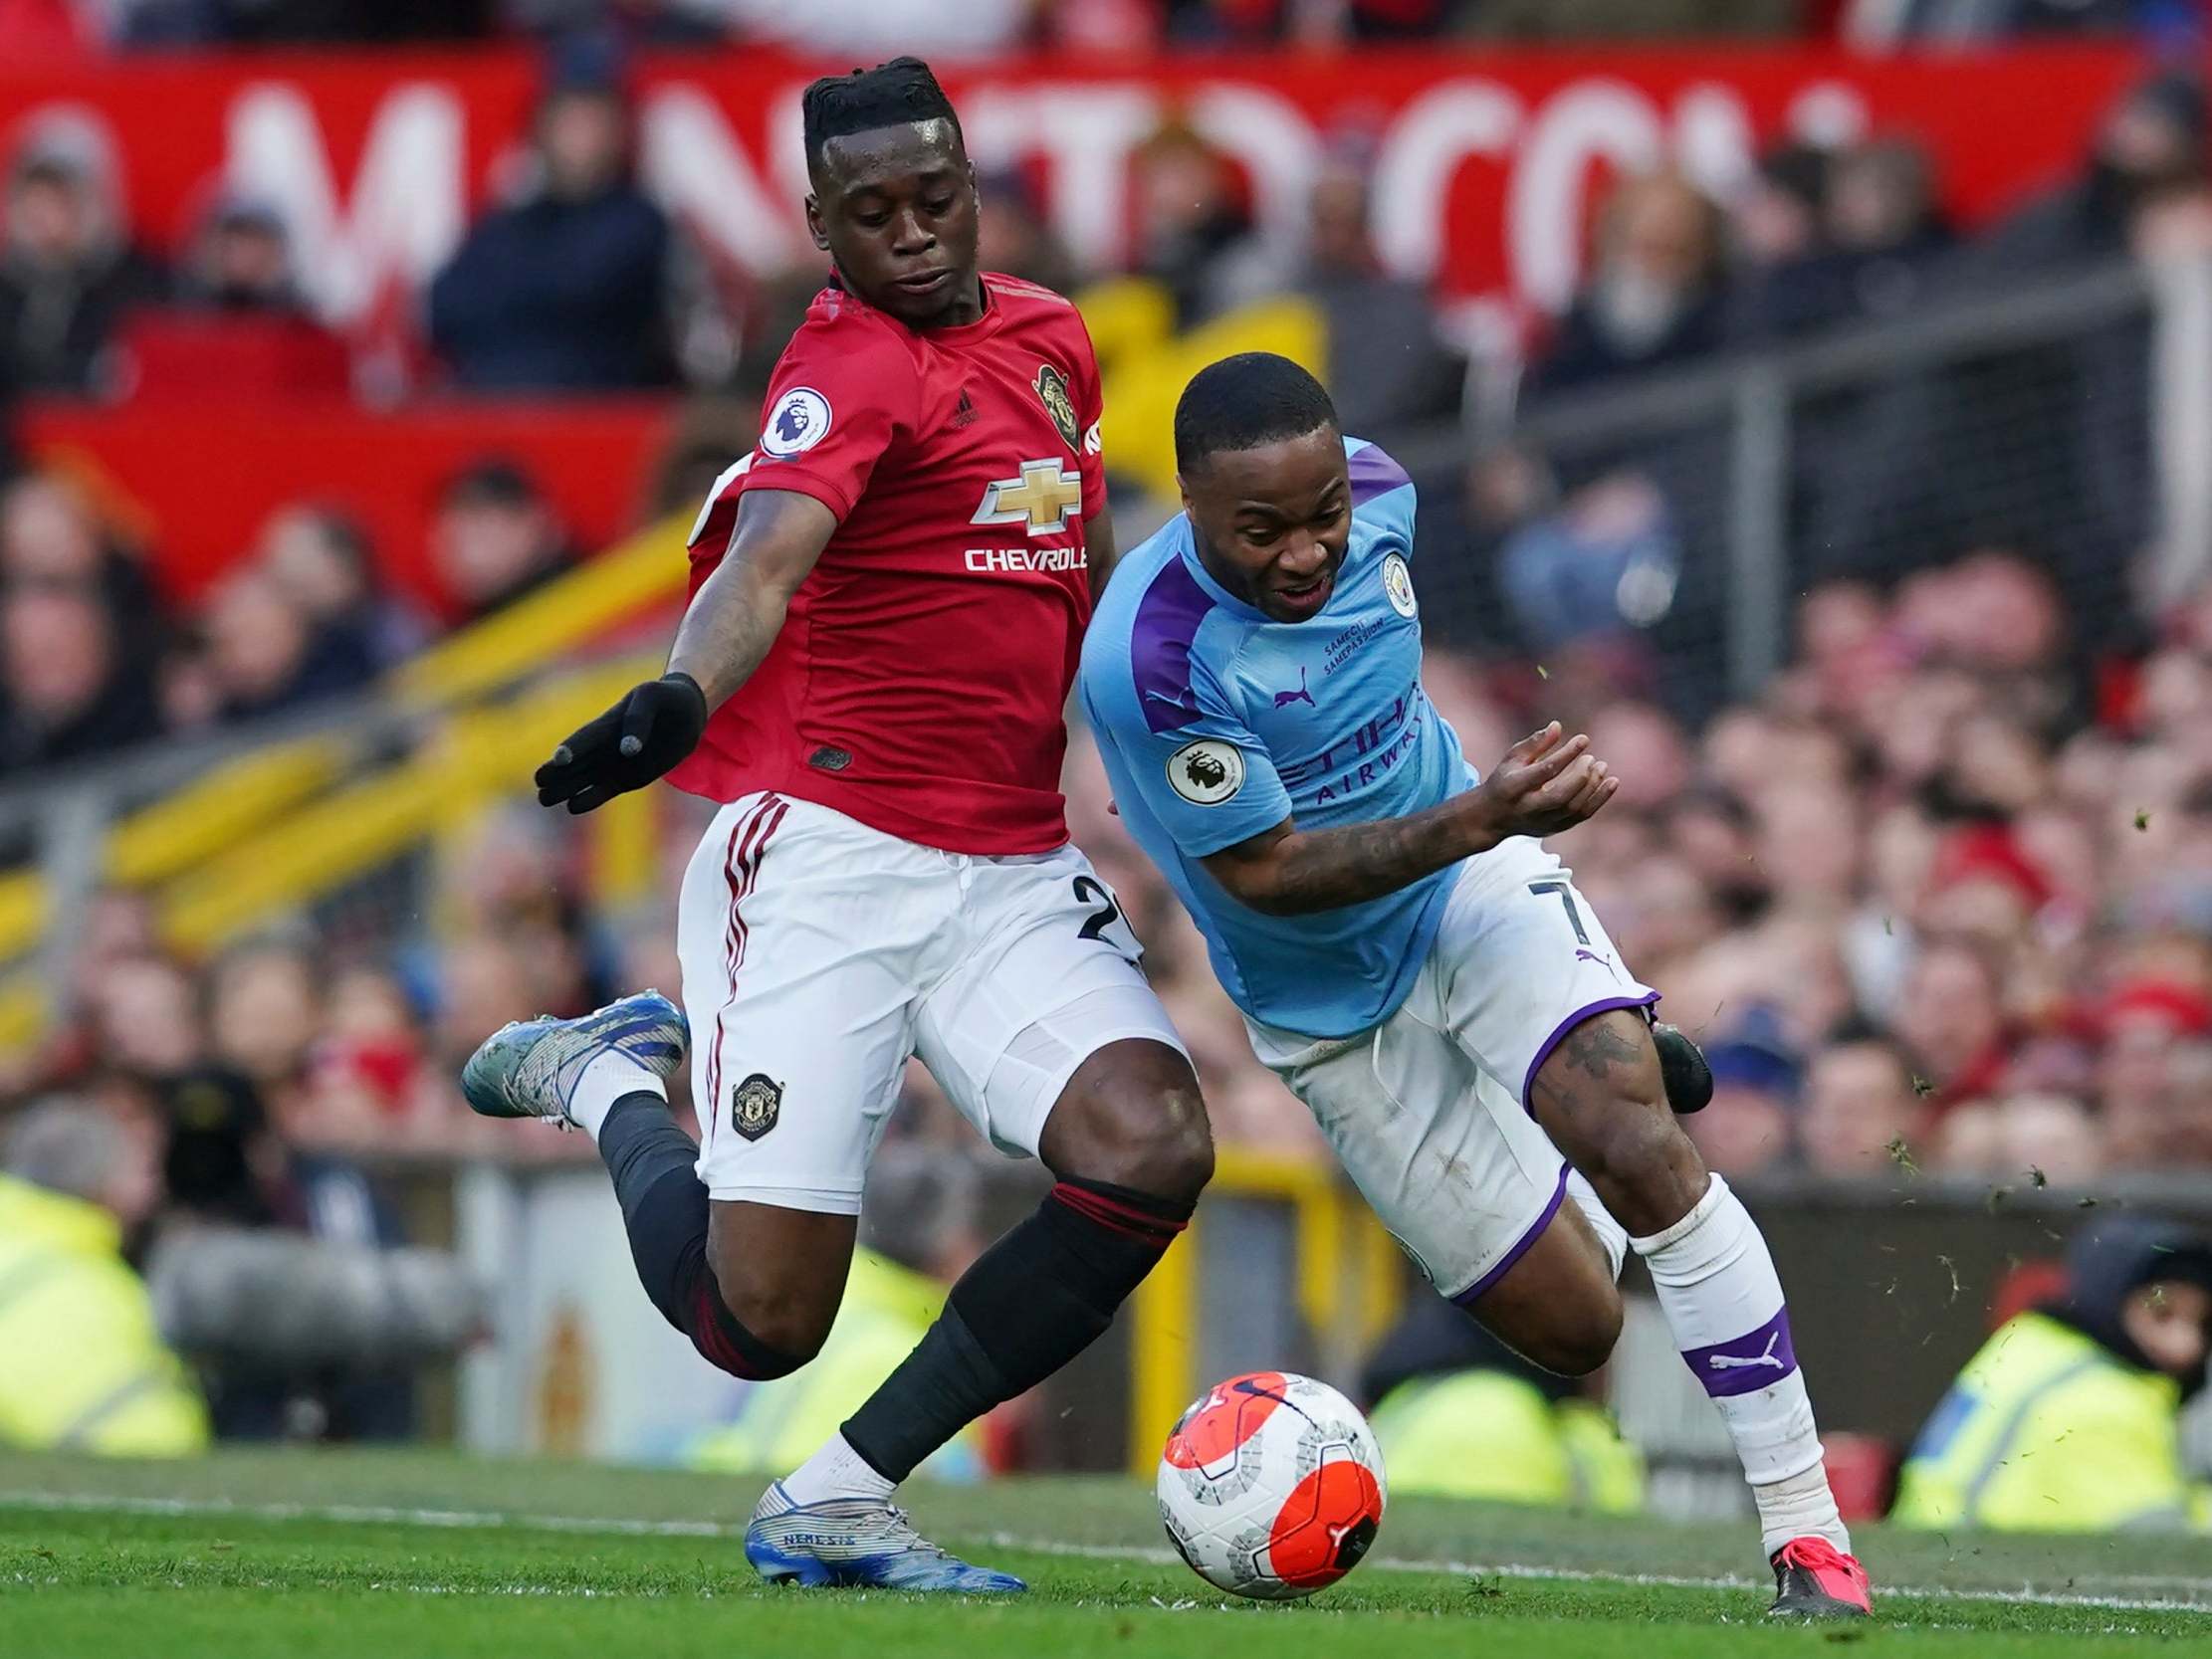 Jamie Carragher praises Manchester United's Aaron Wan-Bissaka as 'best one-on-one full-back in the world'